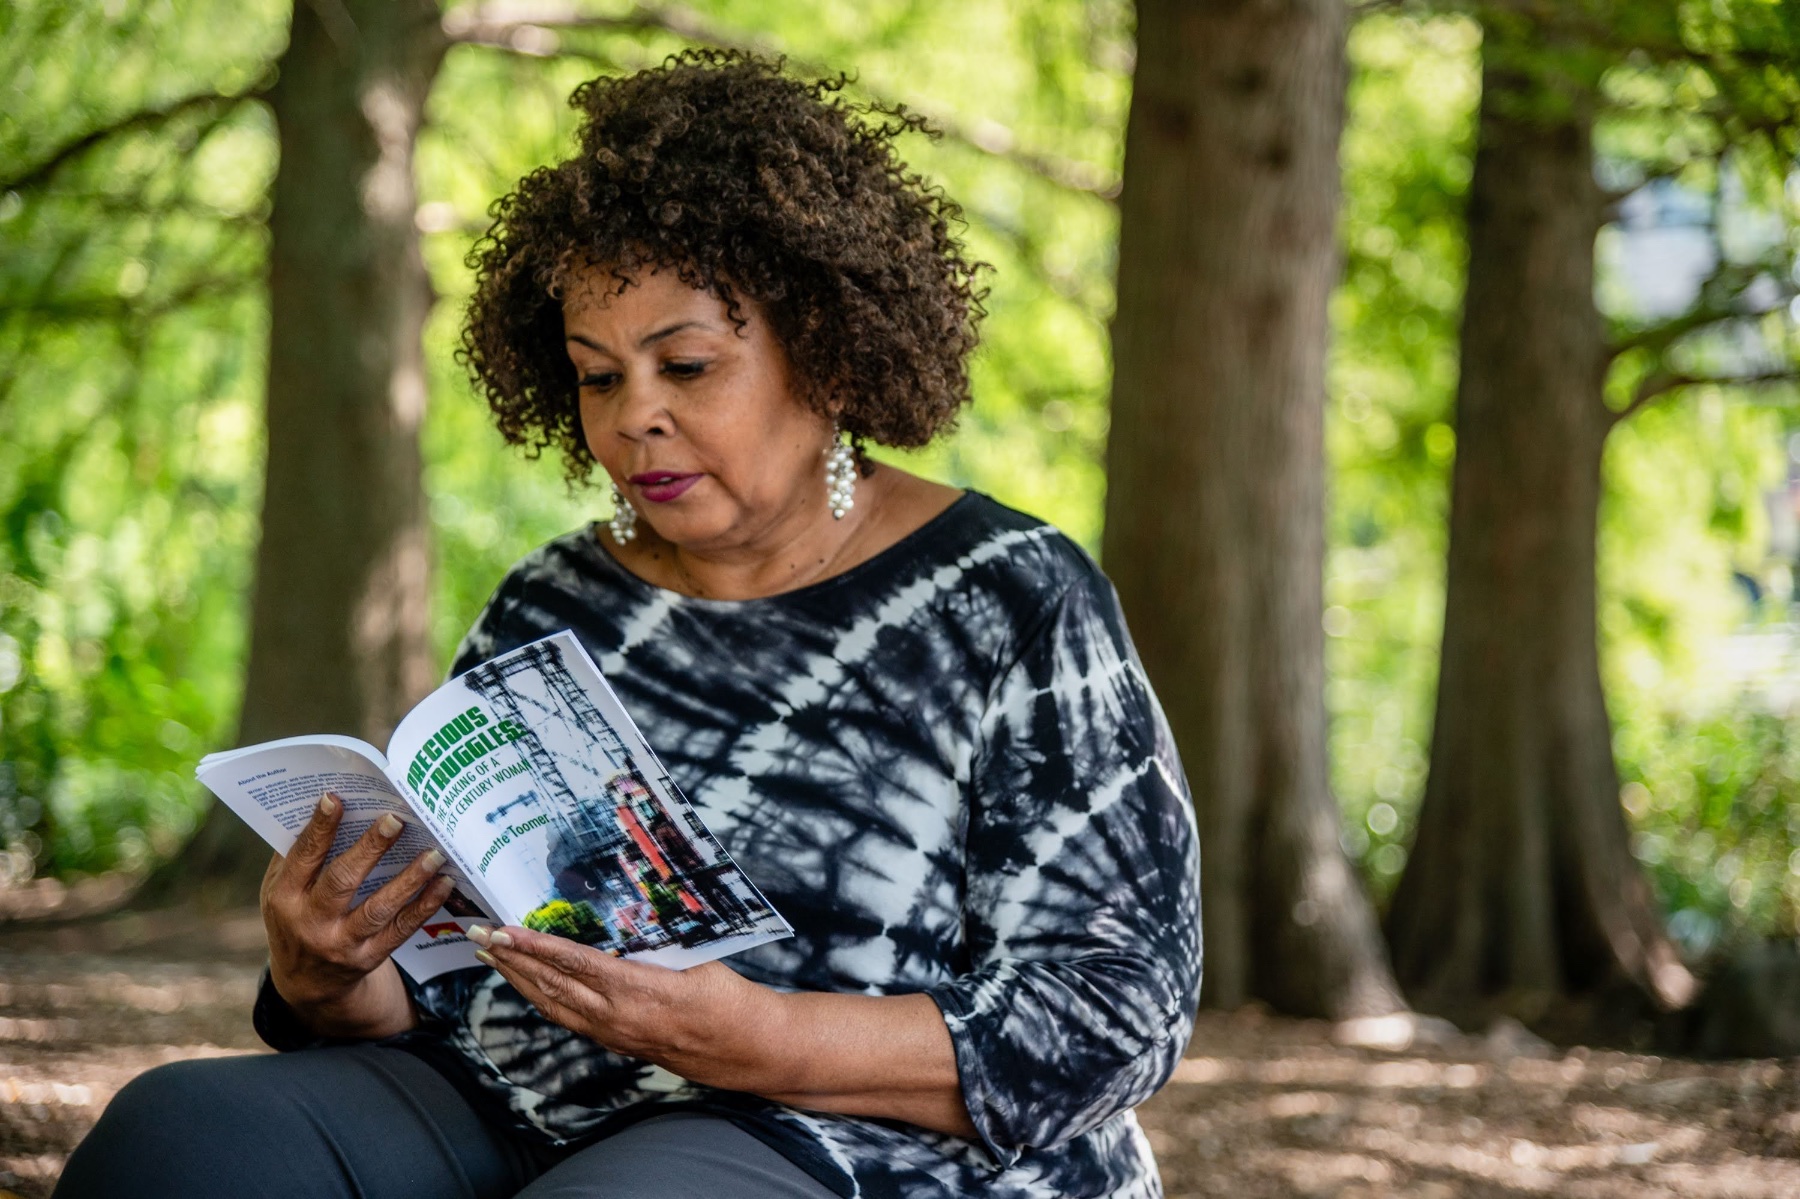 A Black woman reads a book in New York's Central Park.